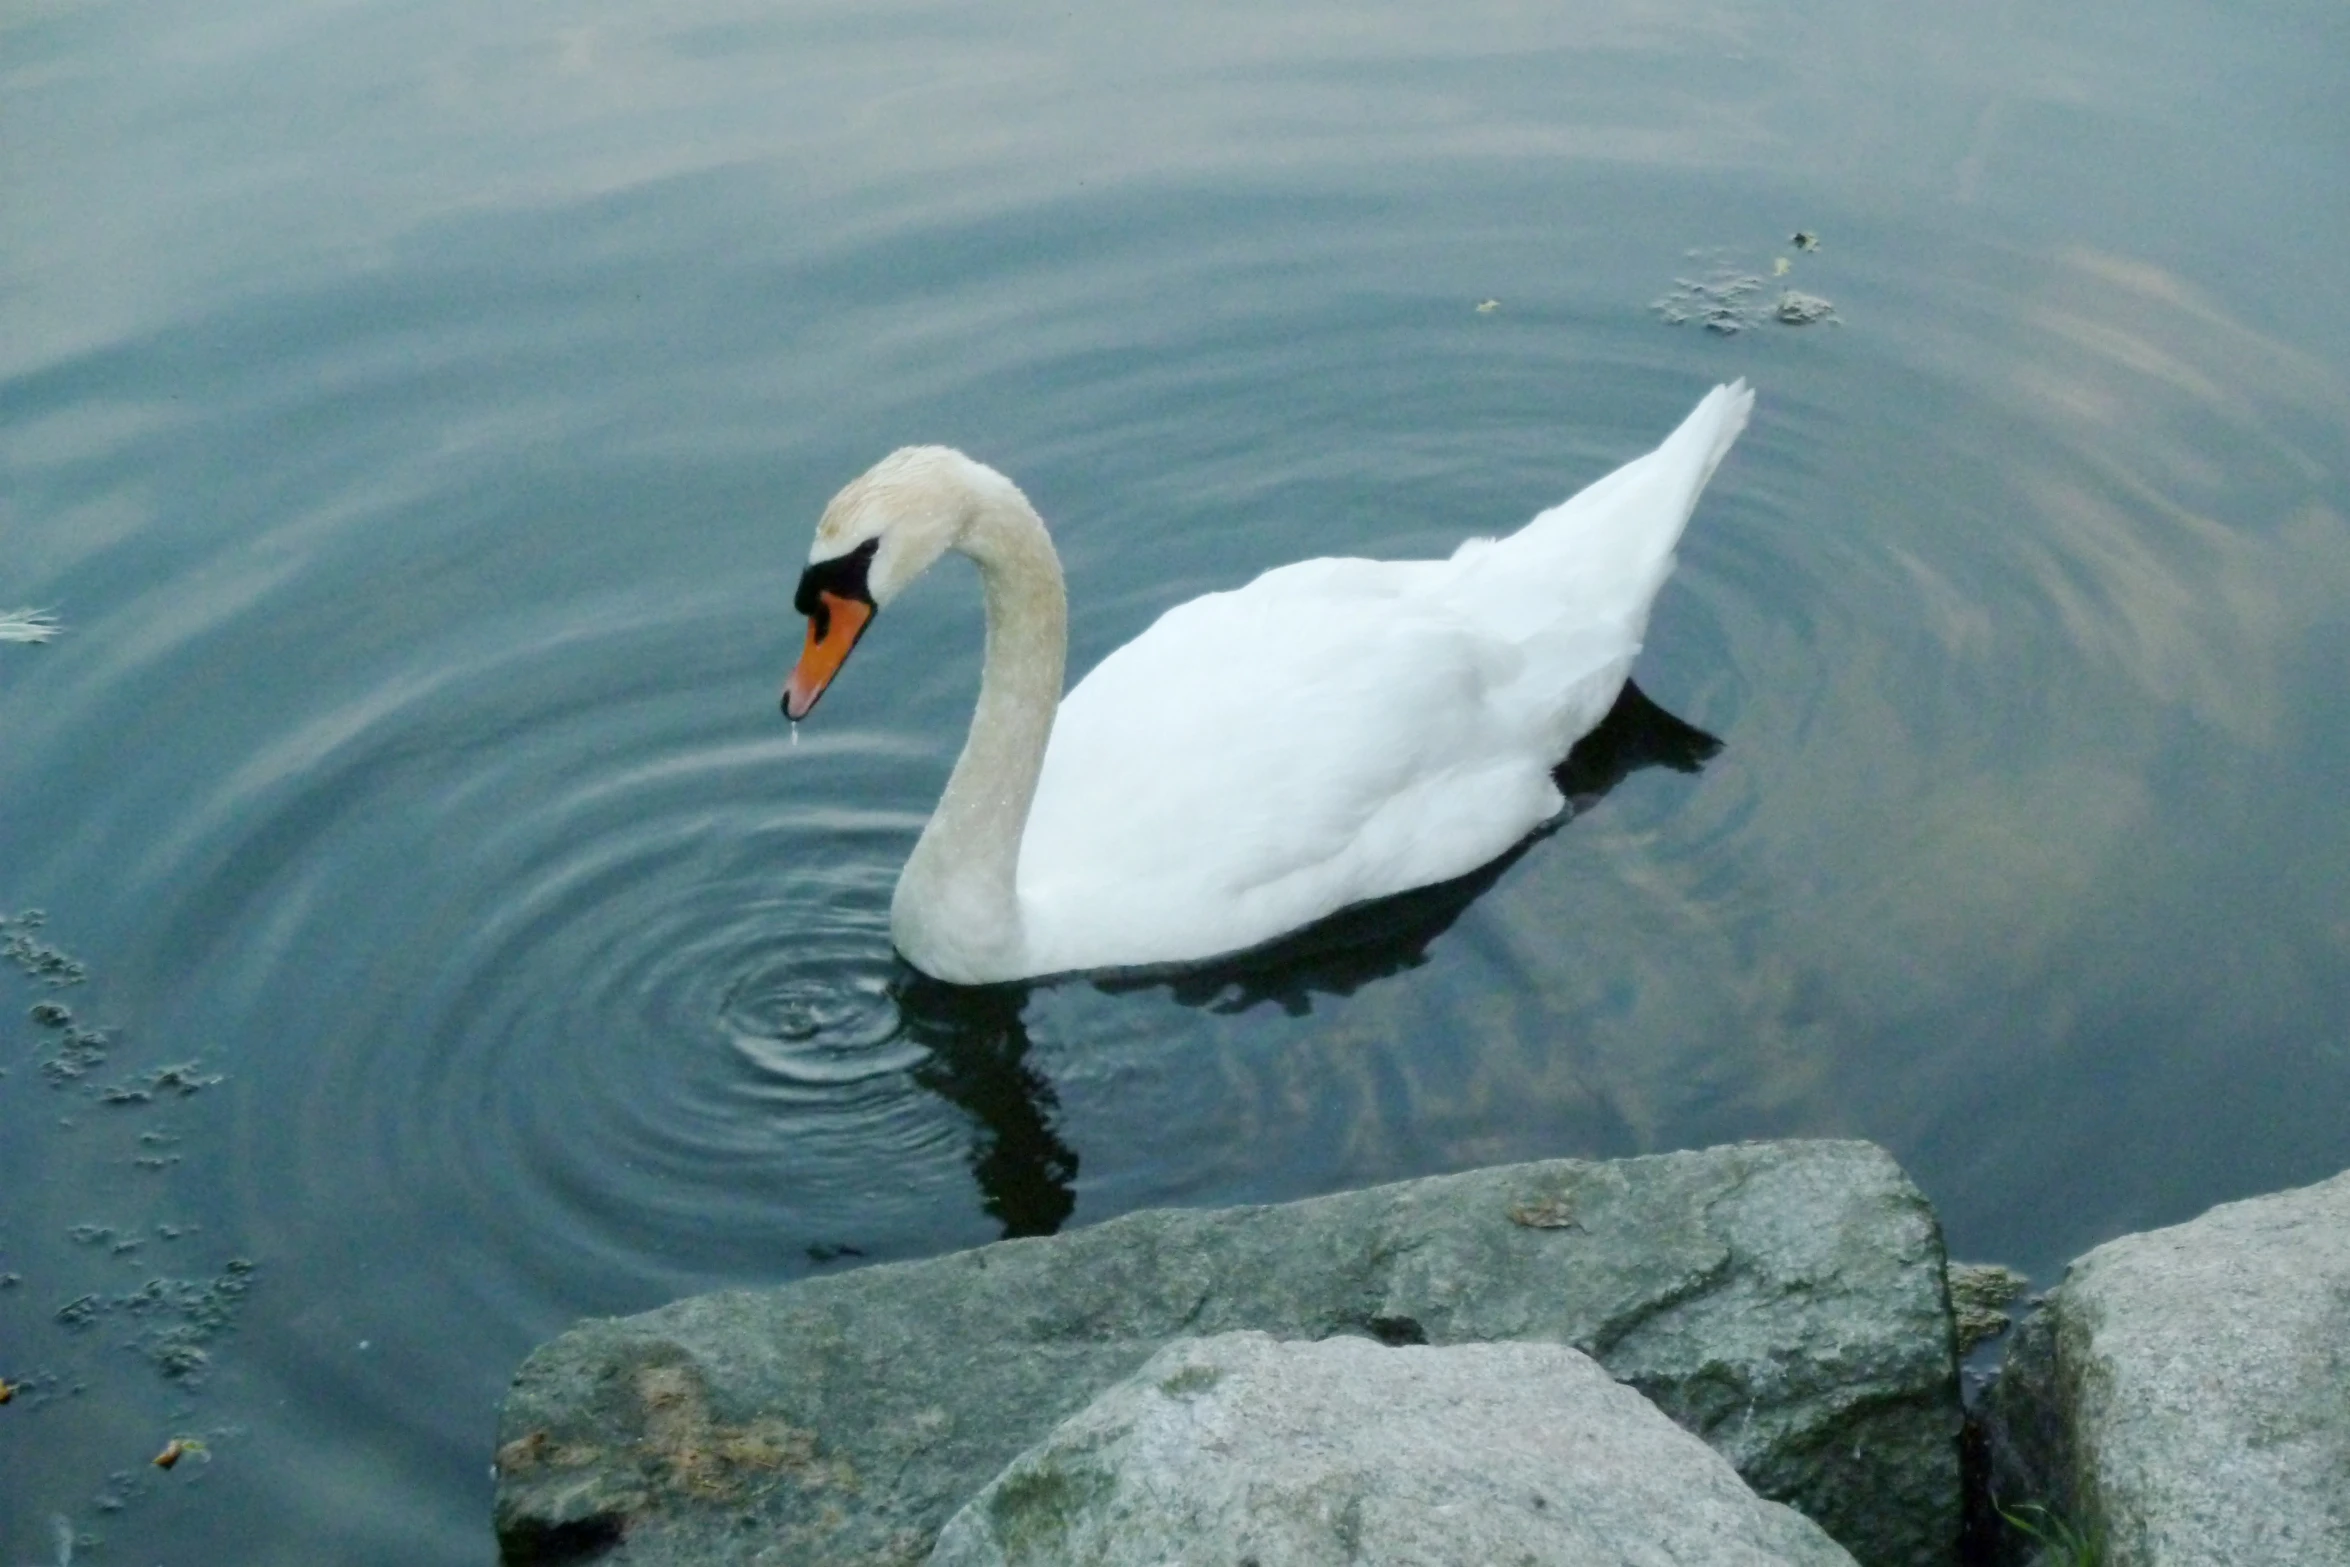 a white swan swimming by some rocks and water